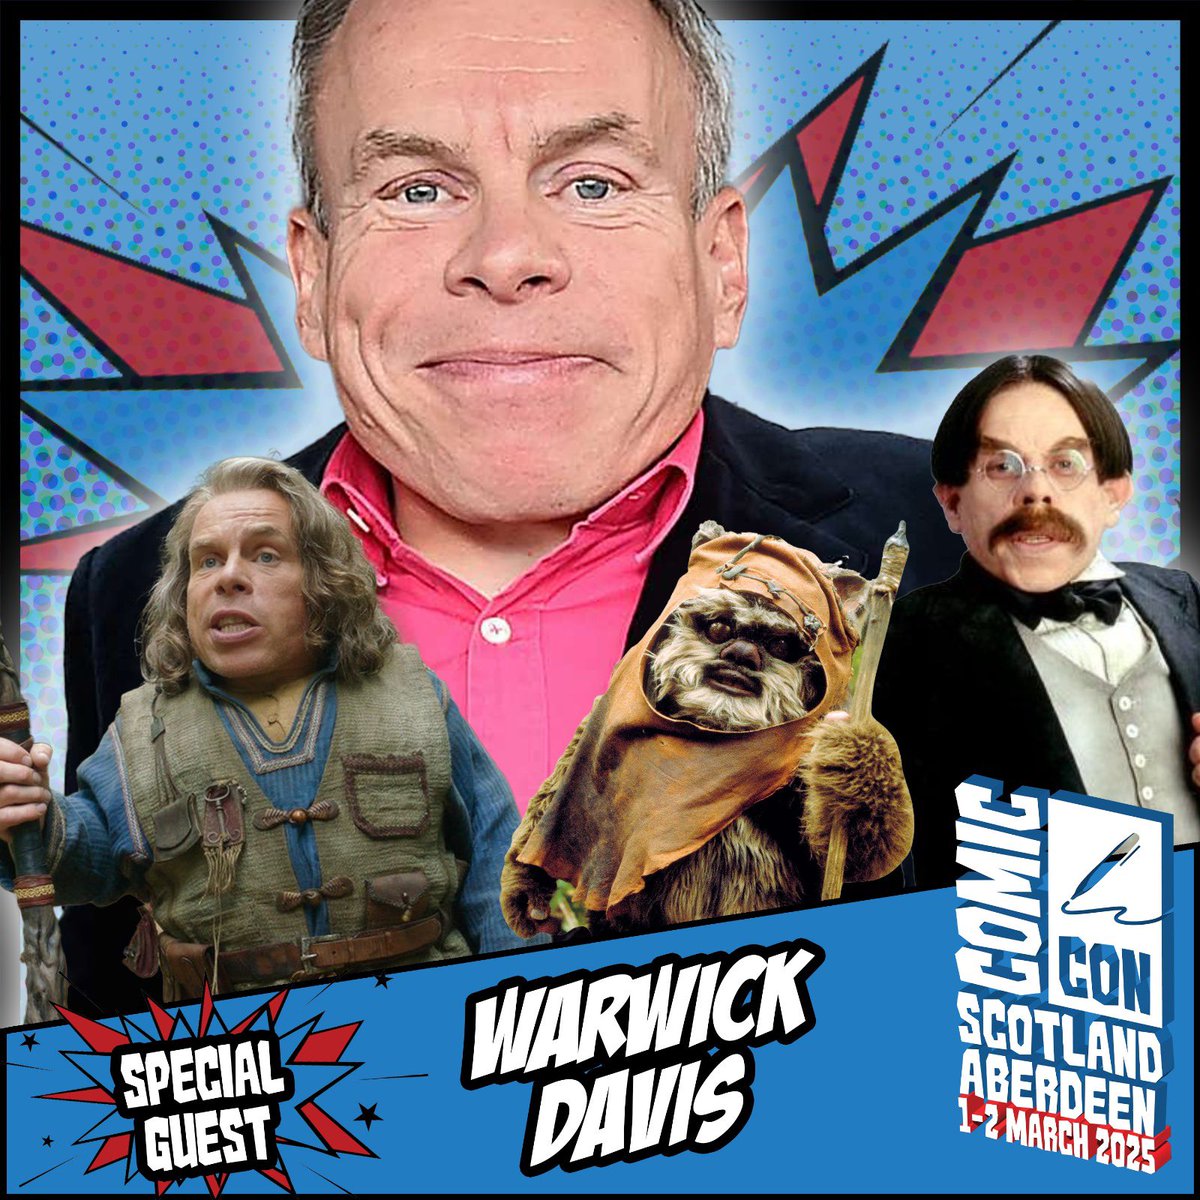 Comic Con Scotland Aberdeen welcomes Warwick Davis, known for projects such as Star Wars, Harry Potter, Willow and many more. Appearing 1-2 March! Tickets: comicconscotlandnortheast.co.uk